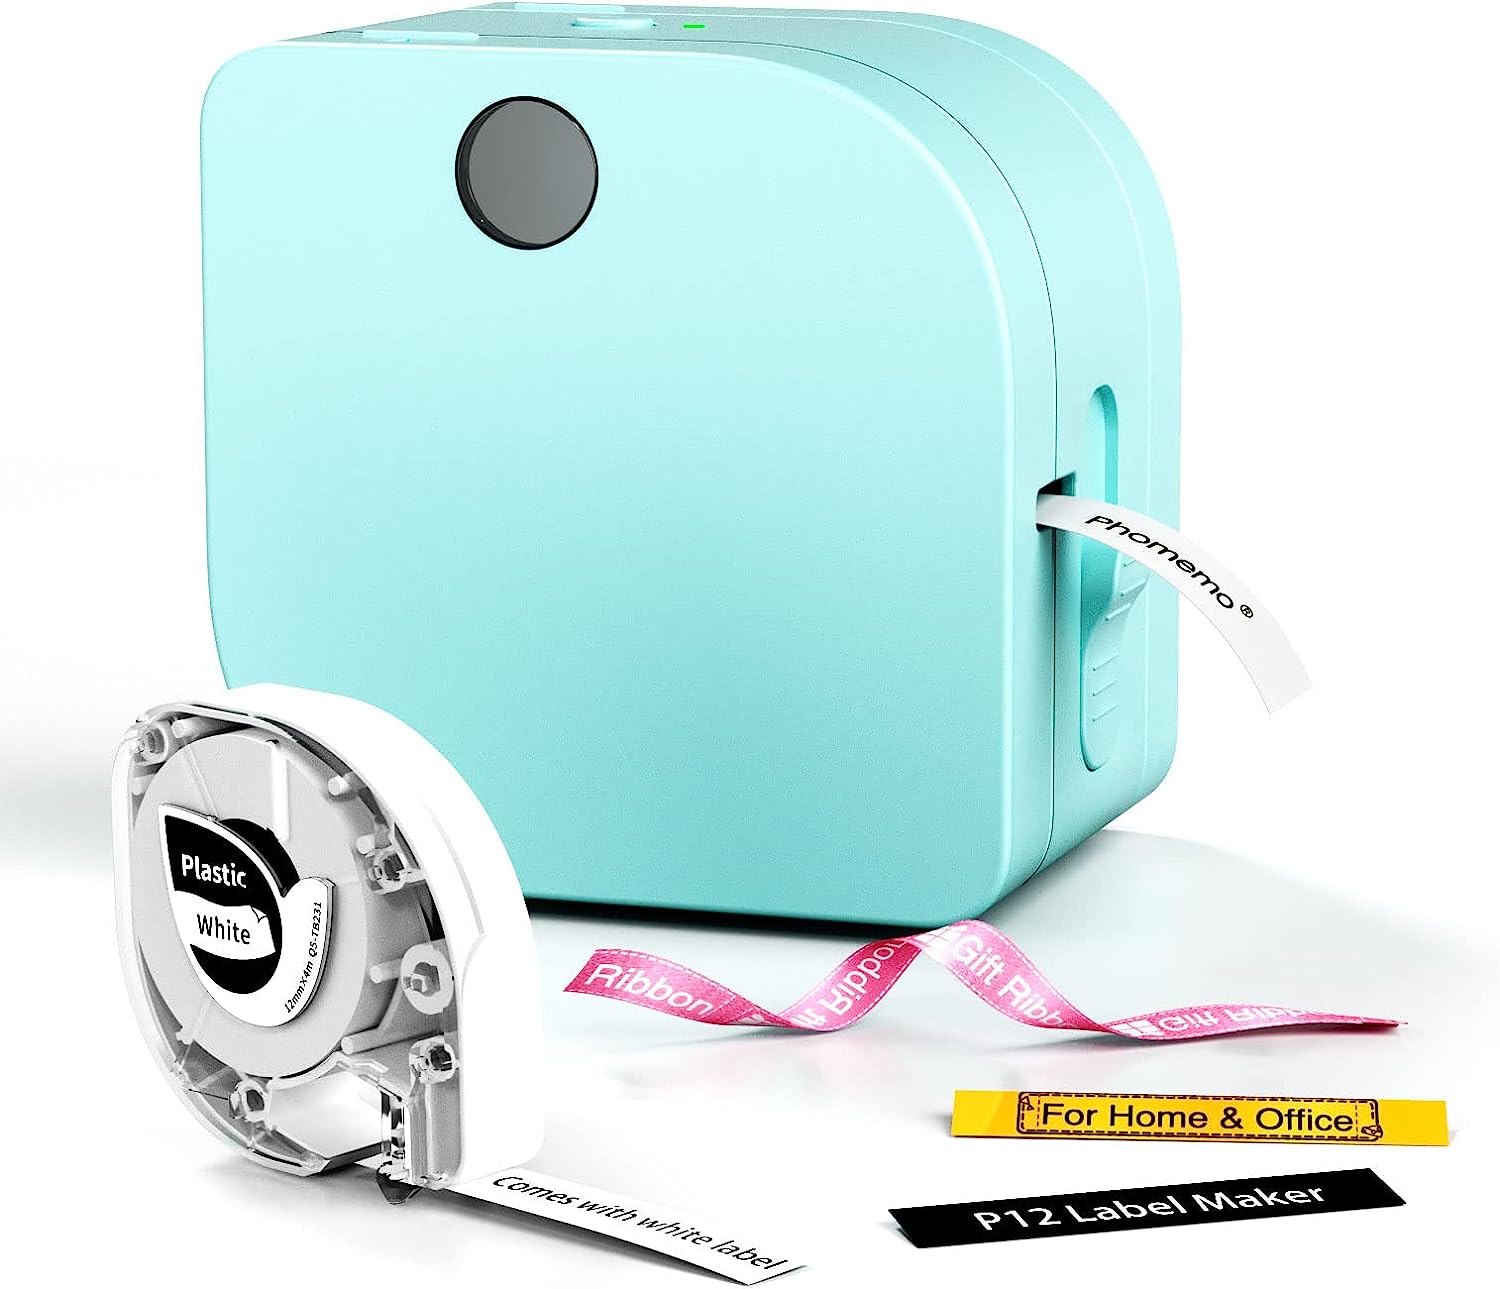 Phomemo Label Makers - Label Maker Machine with Tape [...]